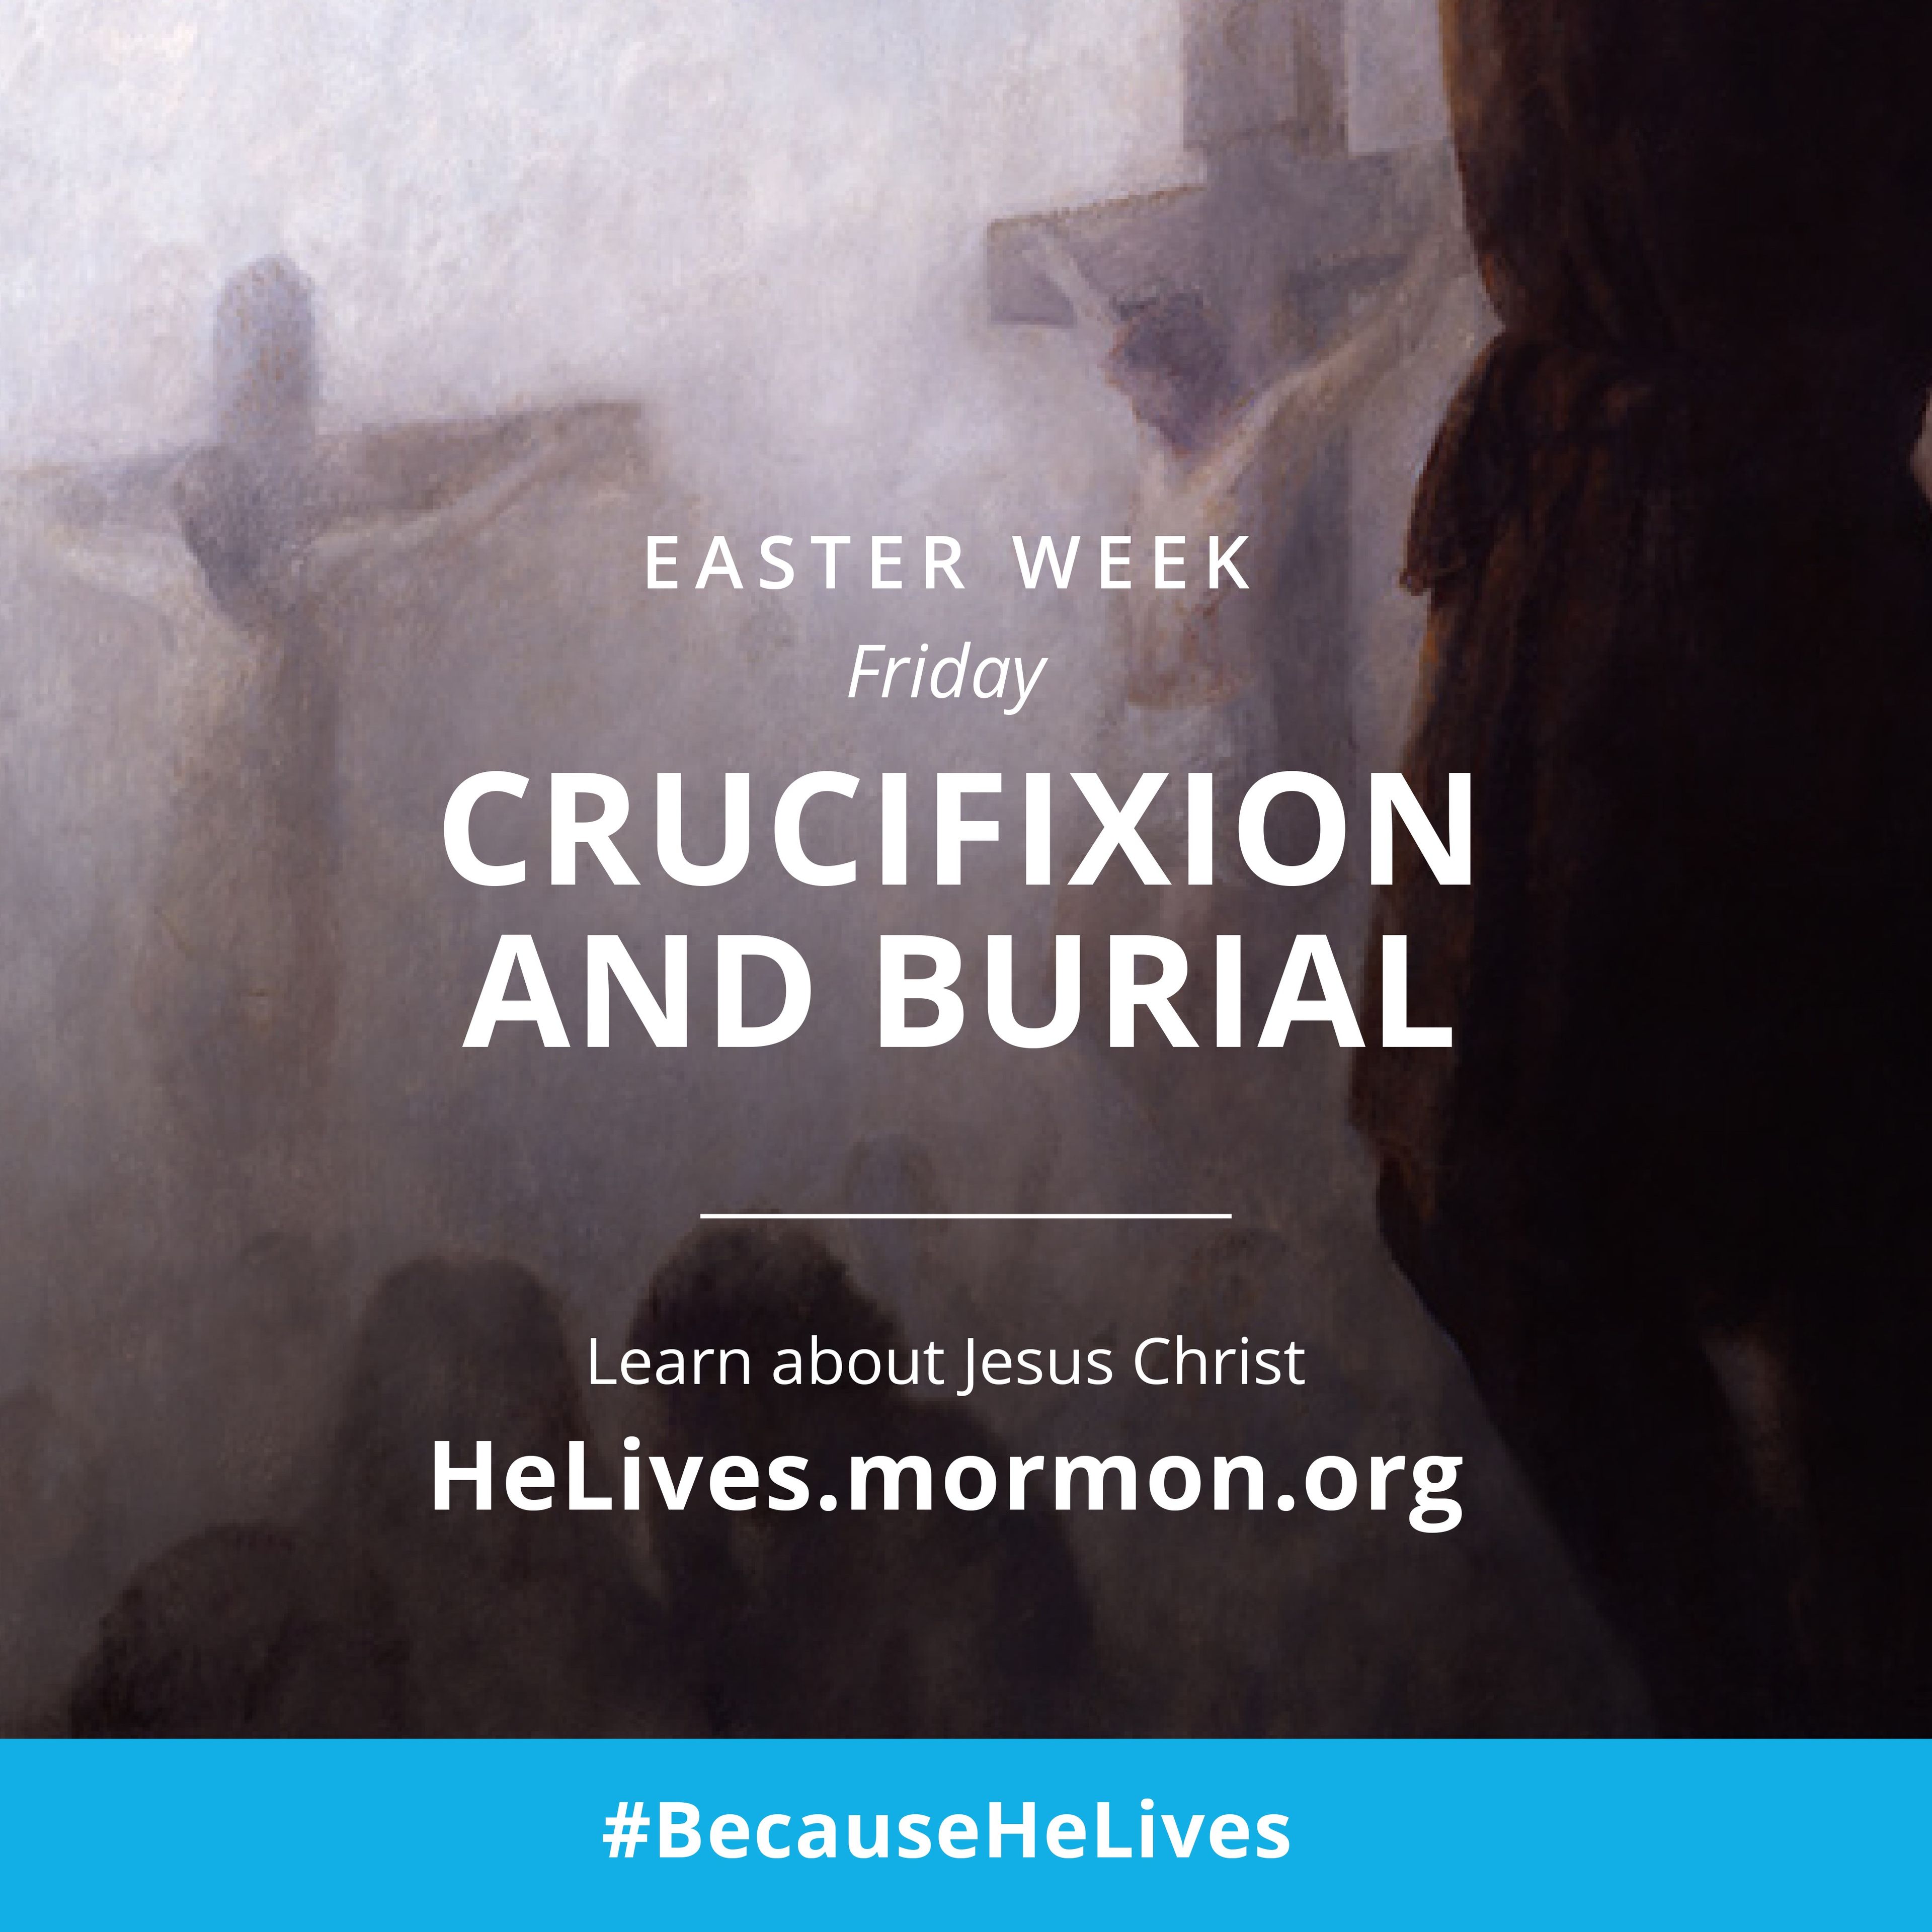 Easter week, Friday: Crucifixion and burial. Learn about Jesus Christ. #BecauseHeLives, HeLives.mormon.org